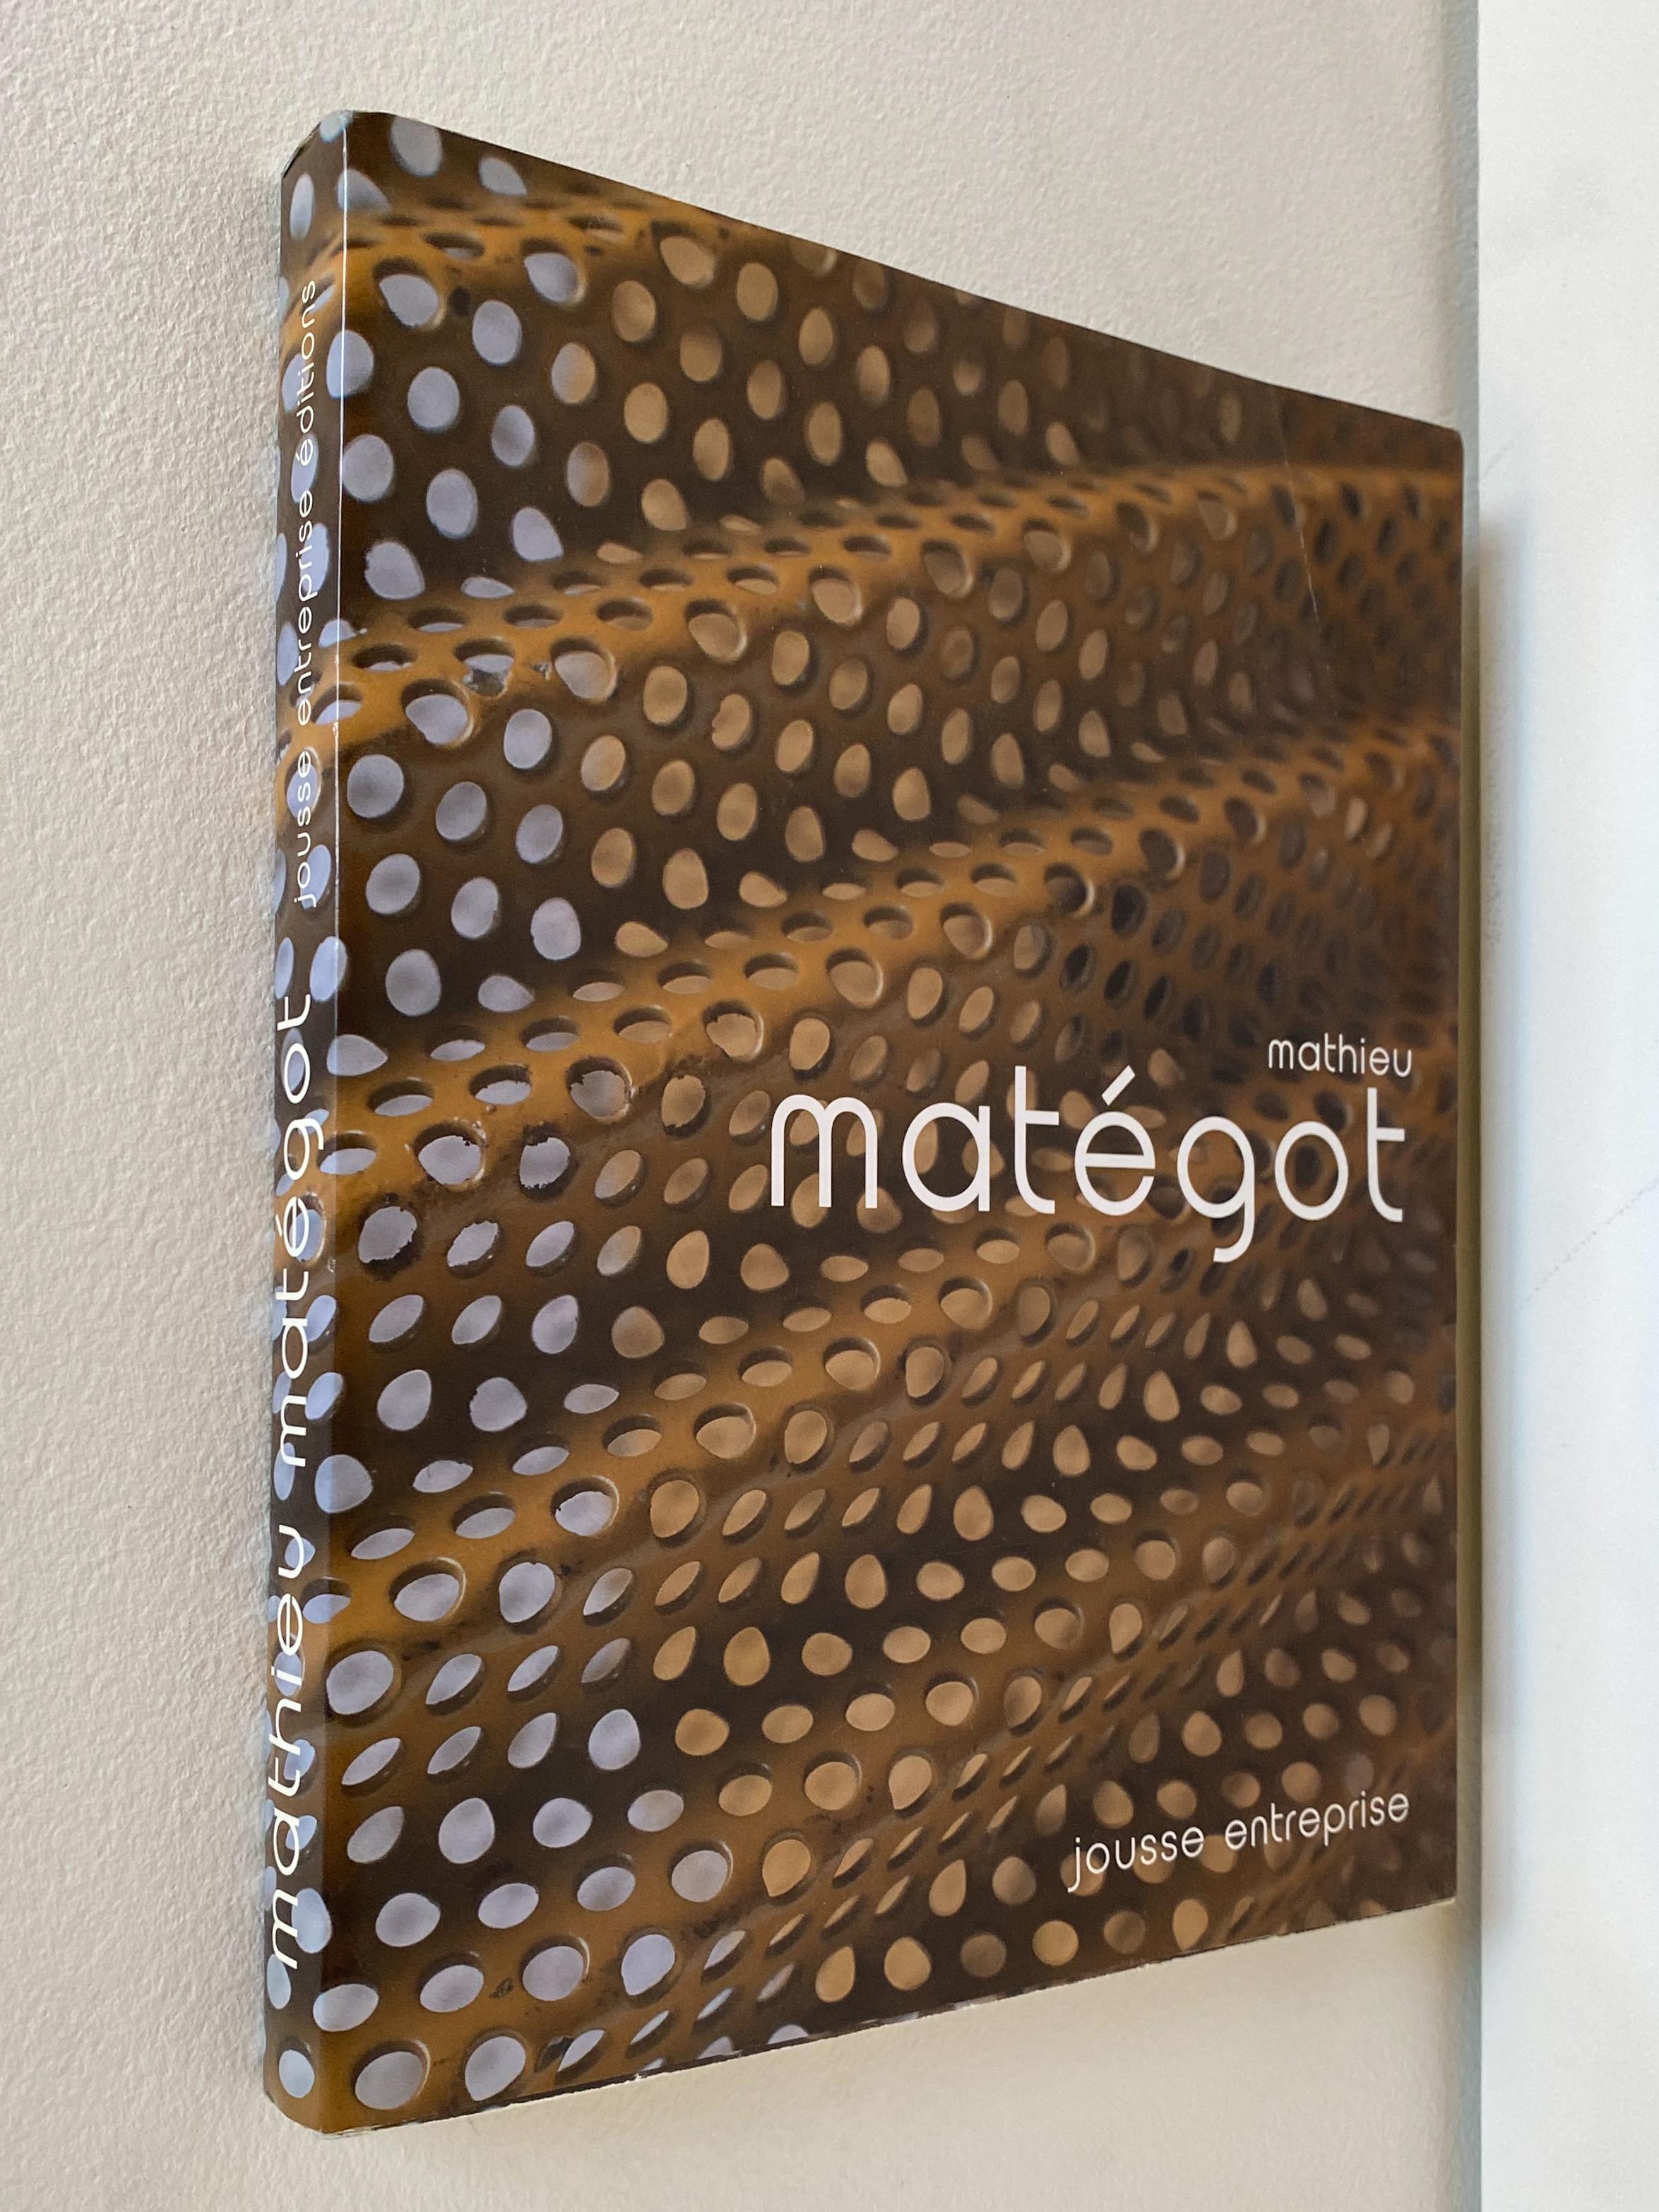 Monograph on the French designer Mathiieu Mategot published by Jousse Enterprise Editions in 2003. First edition in paperback, as issued. 256 pages with English and French text, profusely illustrated in color and black and white. A definitive and